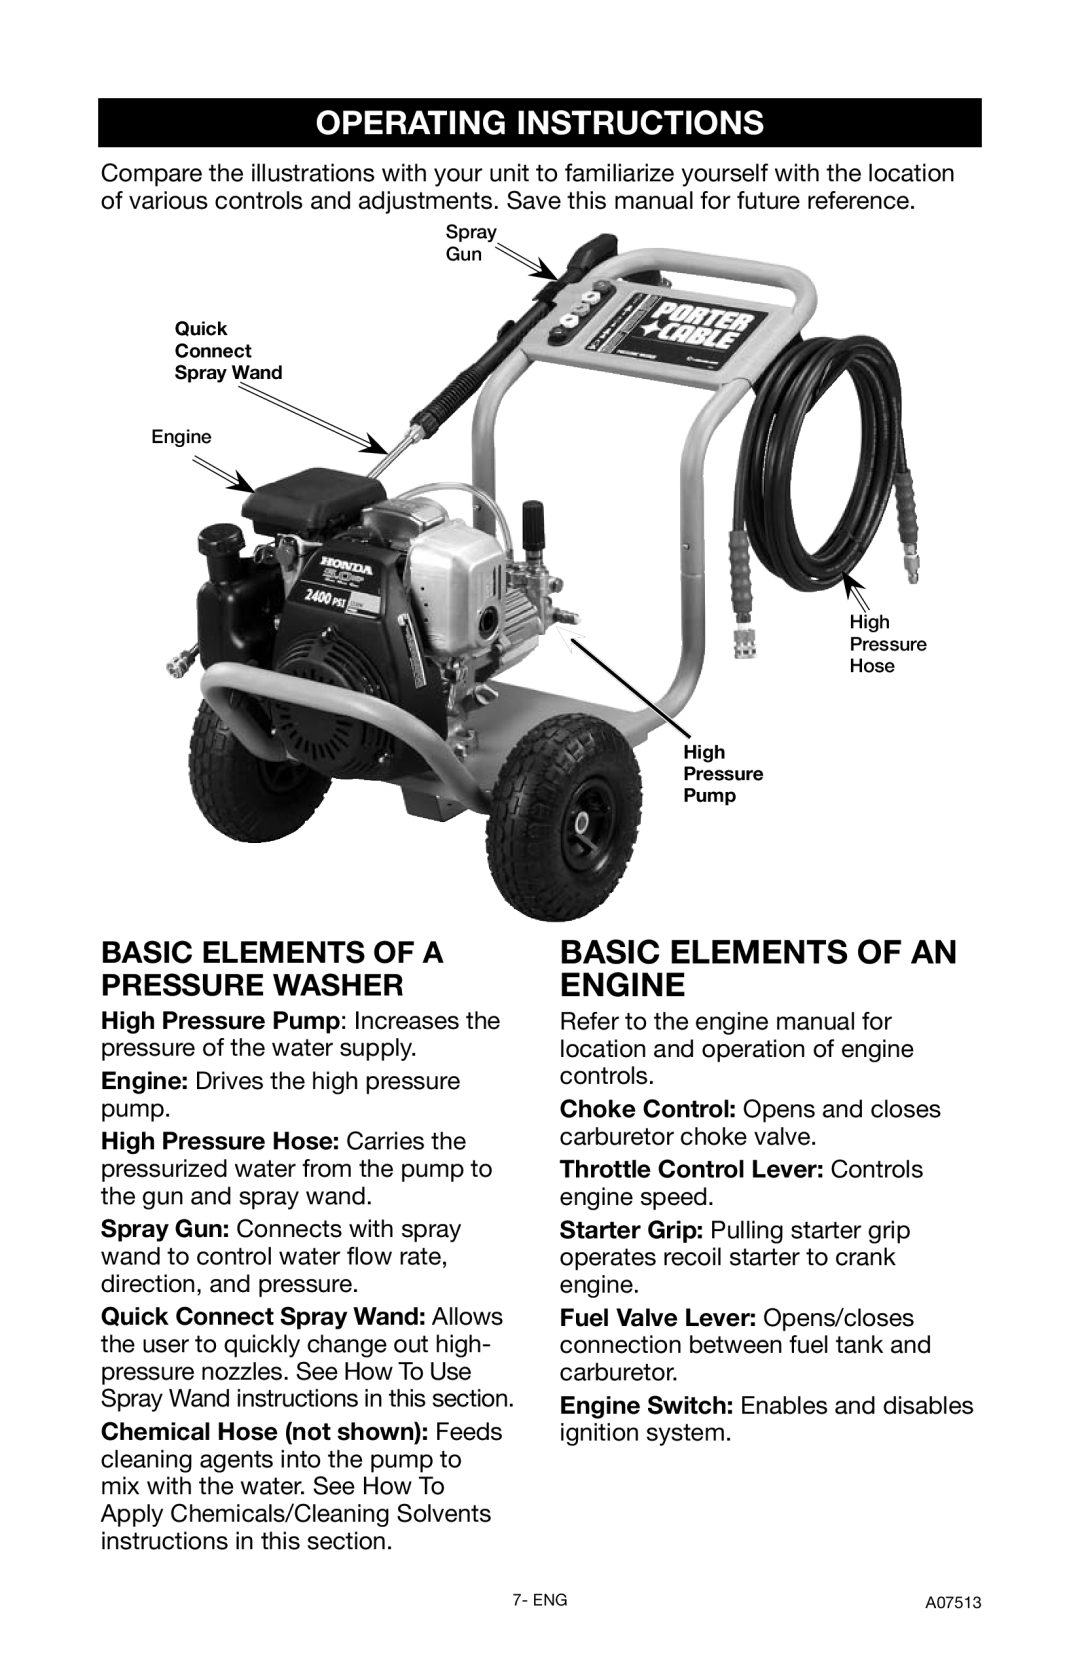 Porter-Cable A07513-0412-0 Operating Instructions, Basic Elements Of A Pressure Washer, Basic Elements Of An Engine 